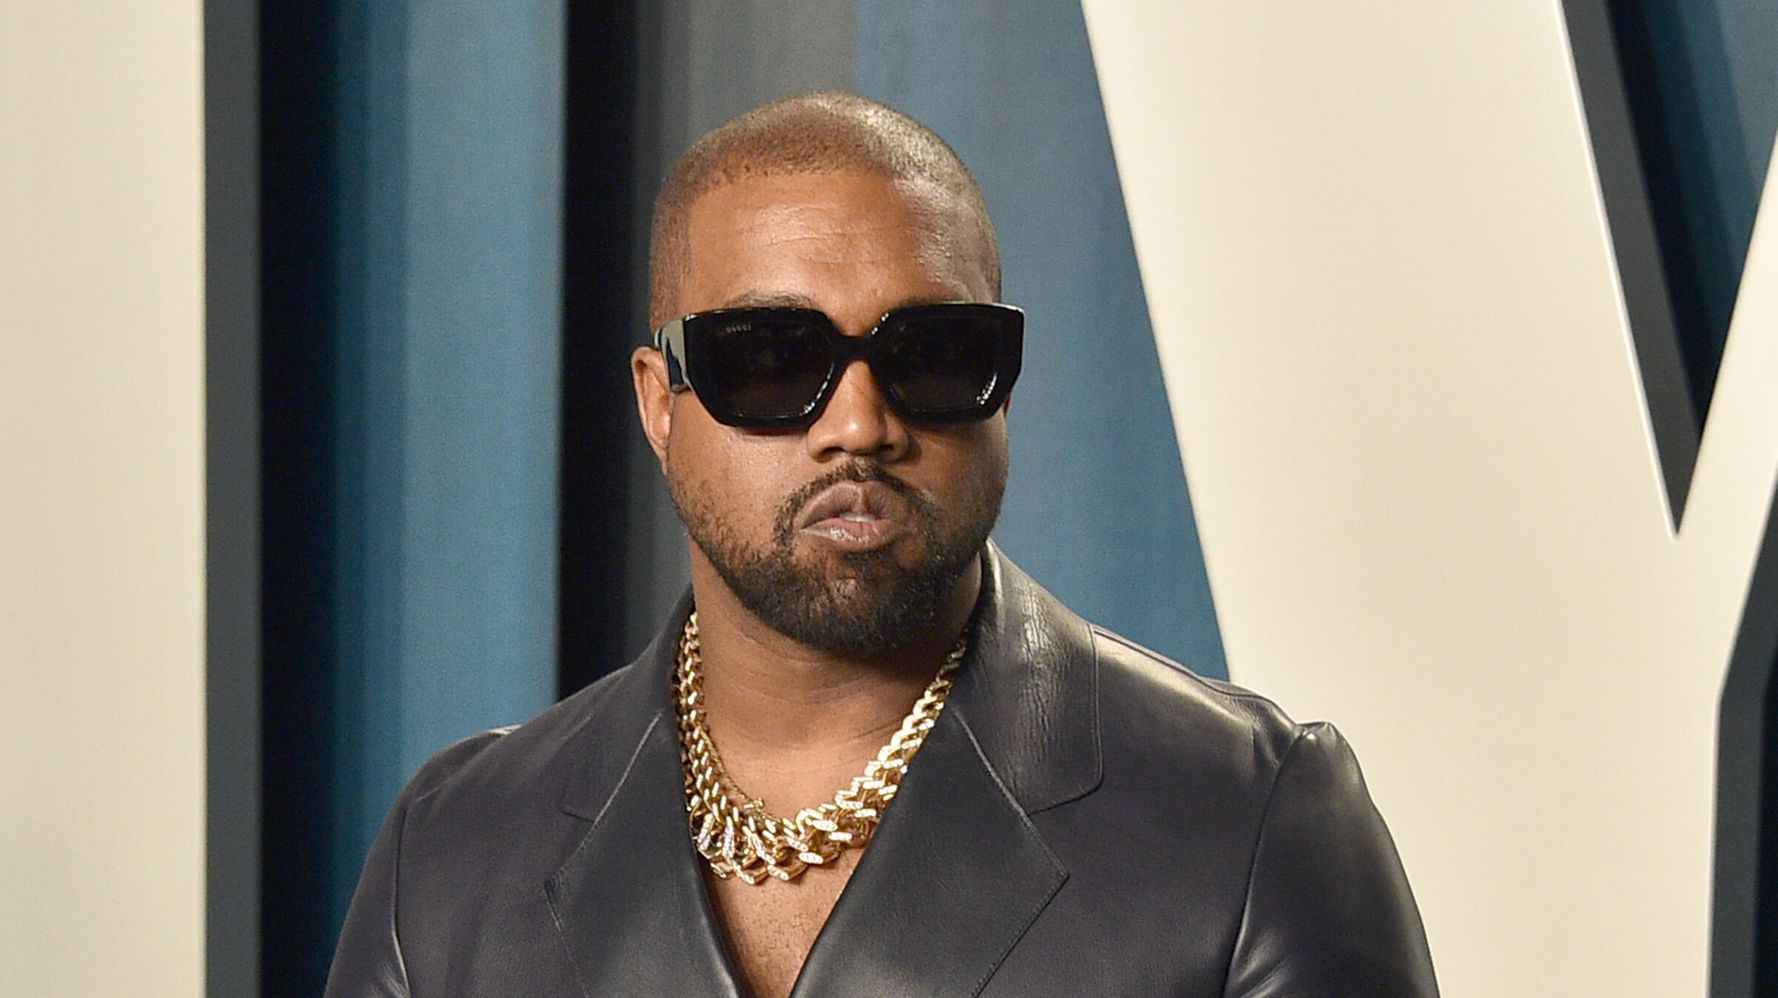 Kanye West's Chicago 'Donda' Event Won't Require Vaccines, But Fans Can Get Vaxxed